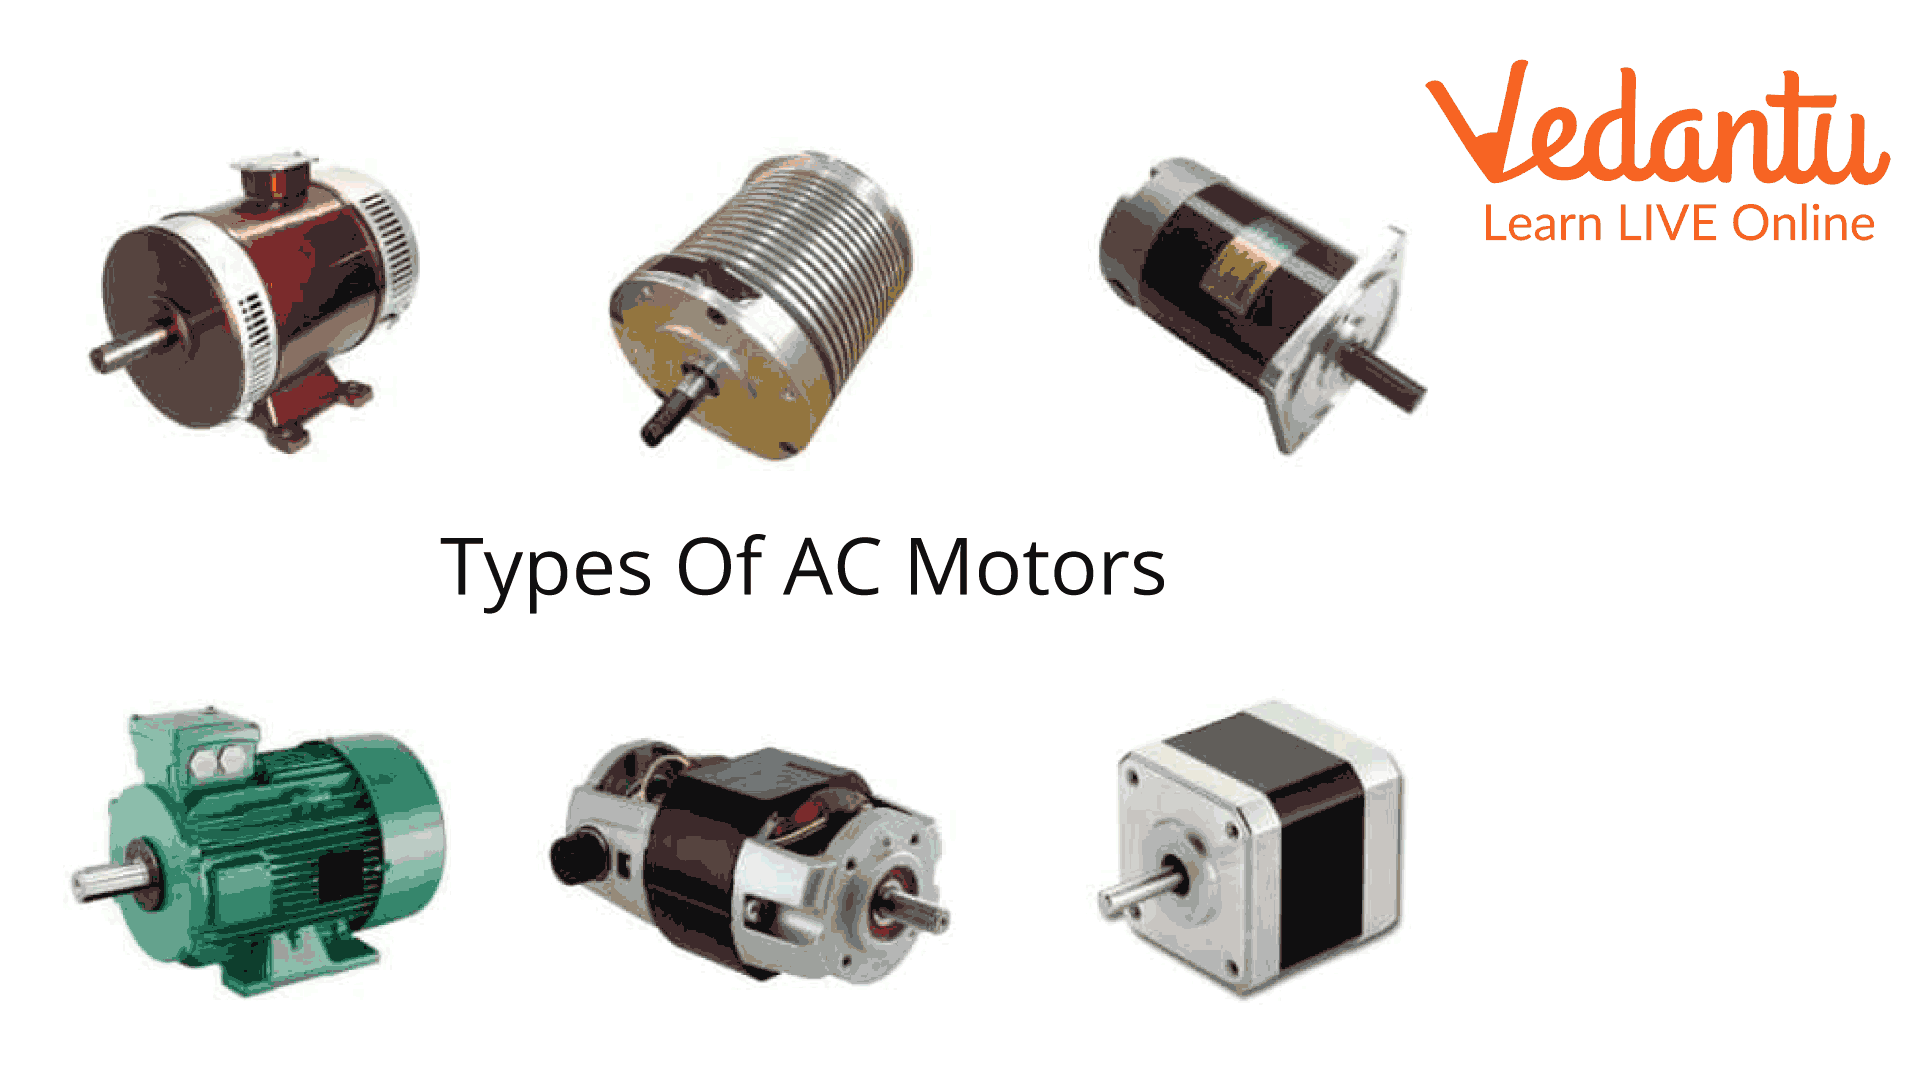 The Types of Motor